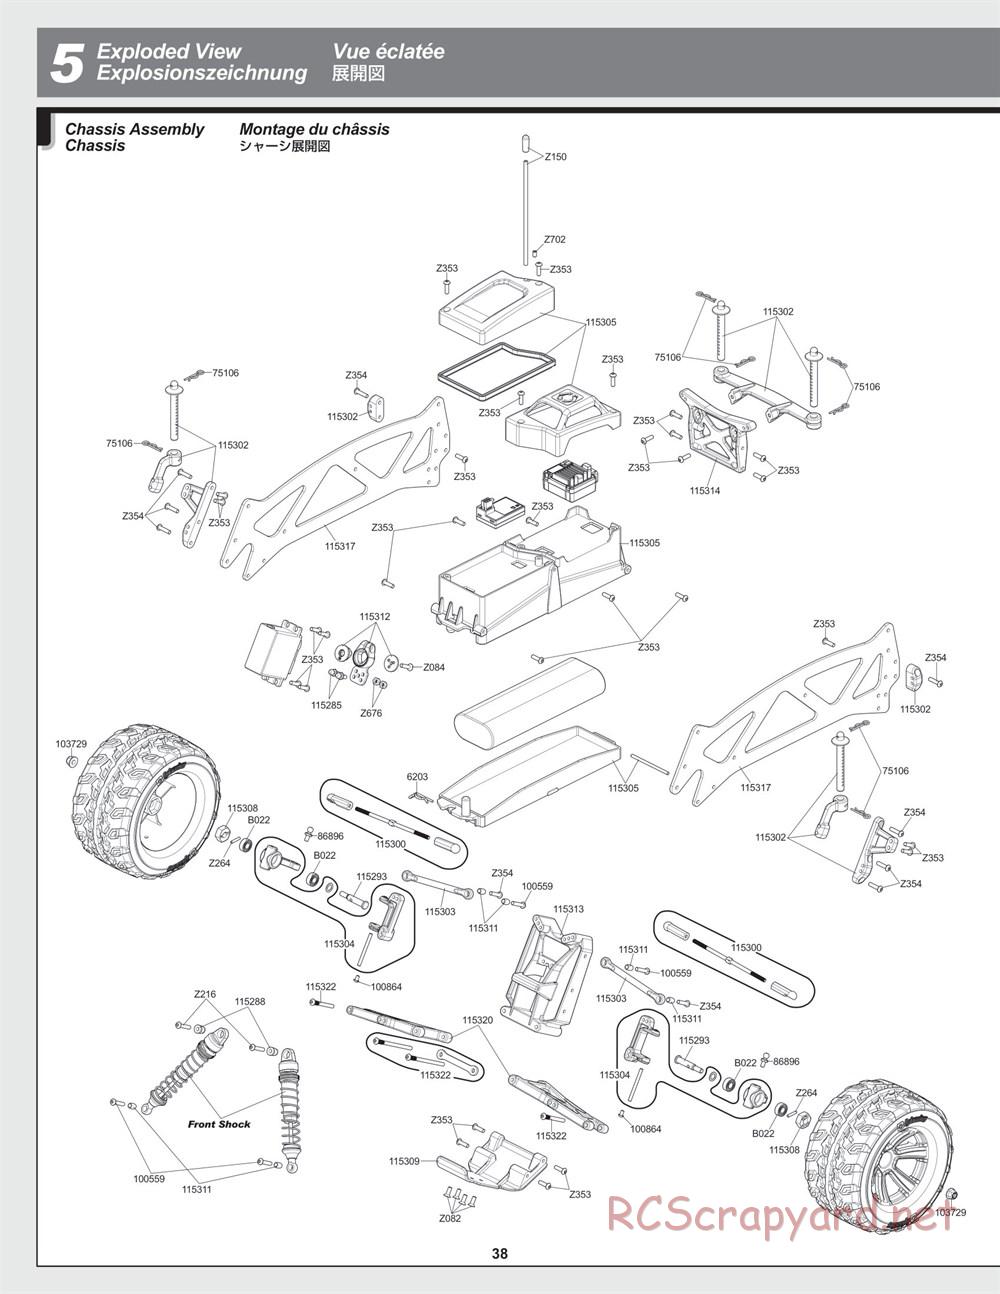 HPI - Jumpshot MT - Exploded View - Page 38